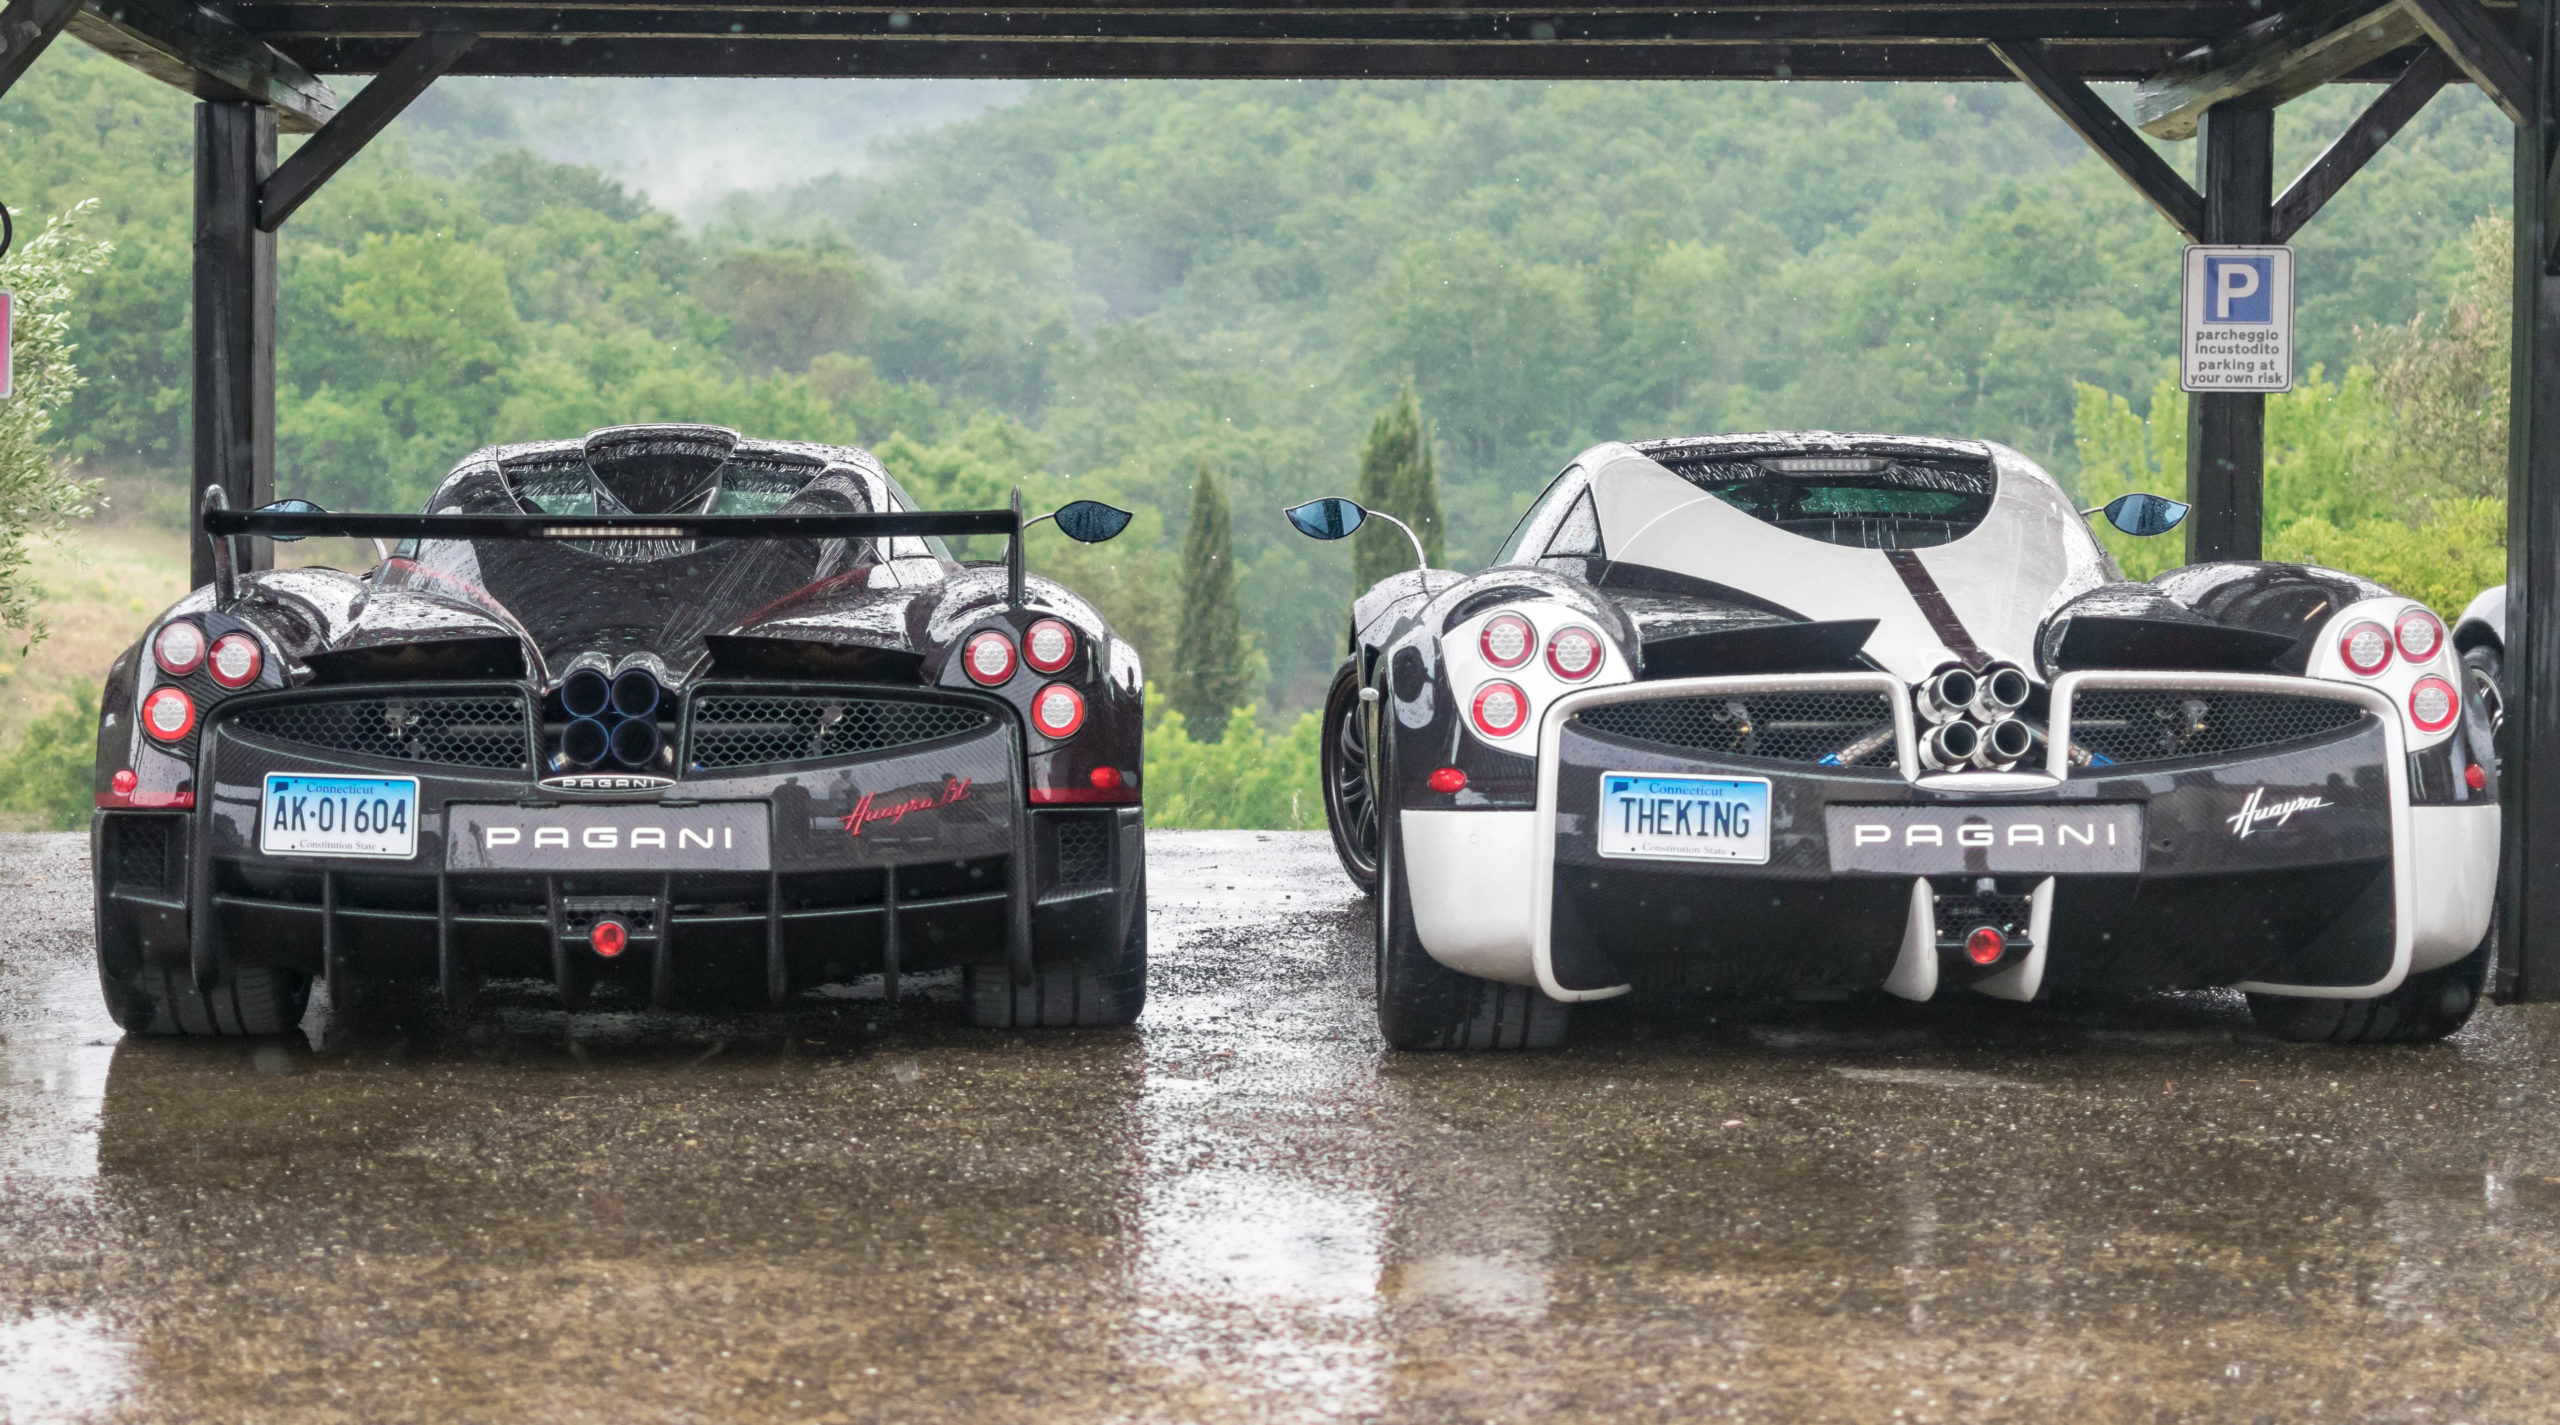 A Pagani Rally In Italy Puts All Other Car Meets To Shame